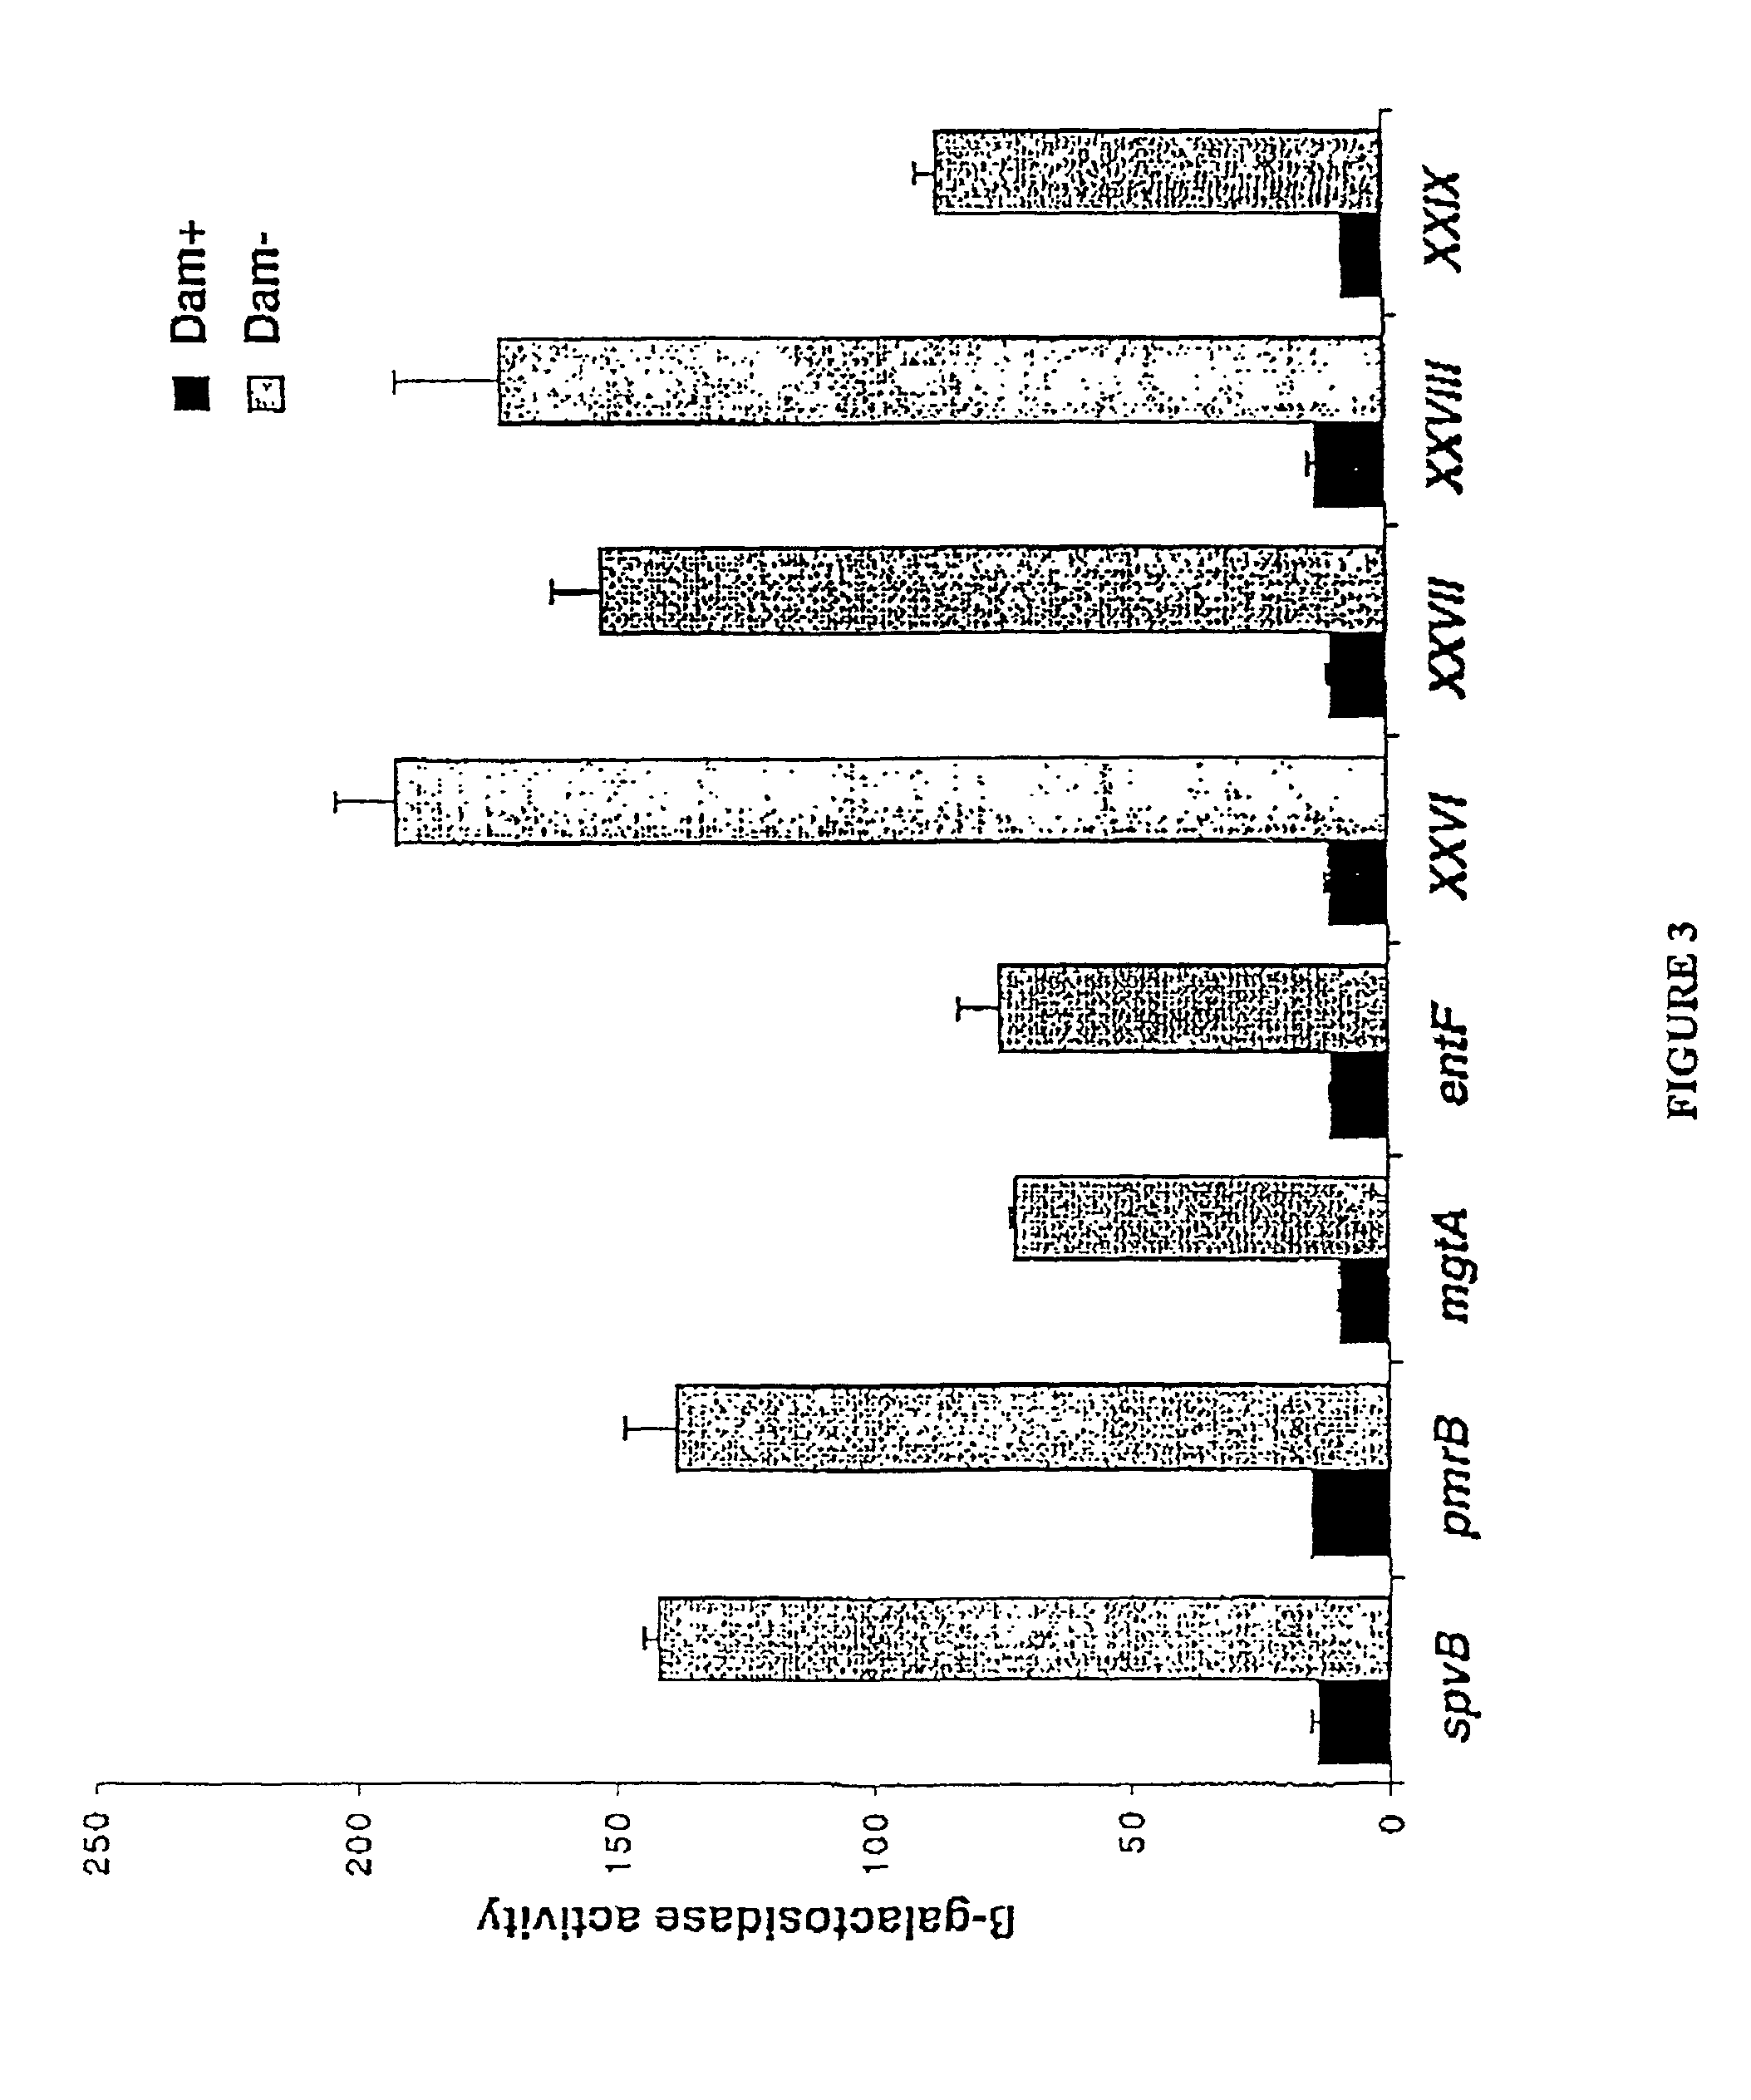 Method of creating antibodies and compositions used for same